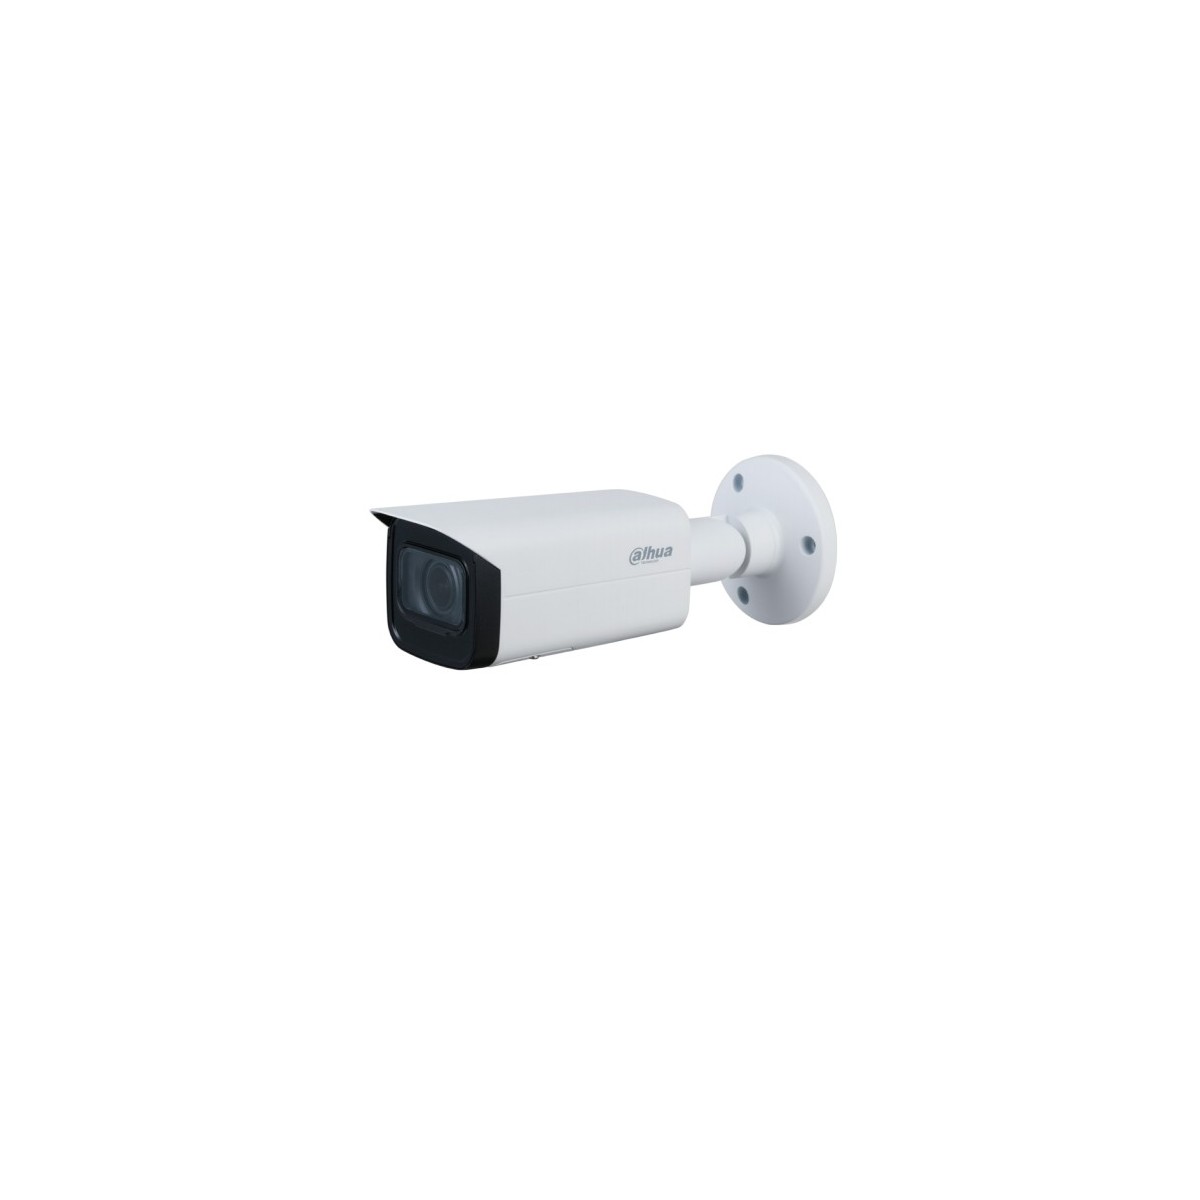 Dahua Technology Lite DH-IPC-HFW2231T-ZS-S2 - IP security camera - Indoor & outdoor - Wired - CE-LVD: EN60950-1 CE-EMC: Electrom